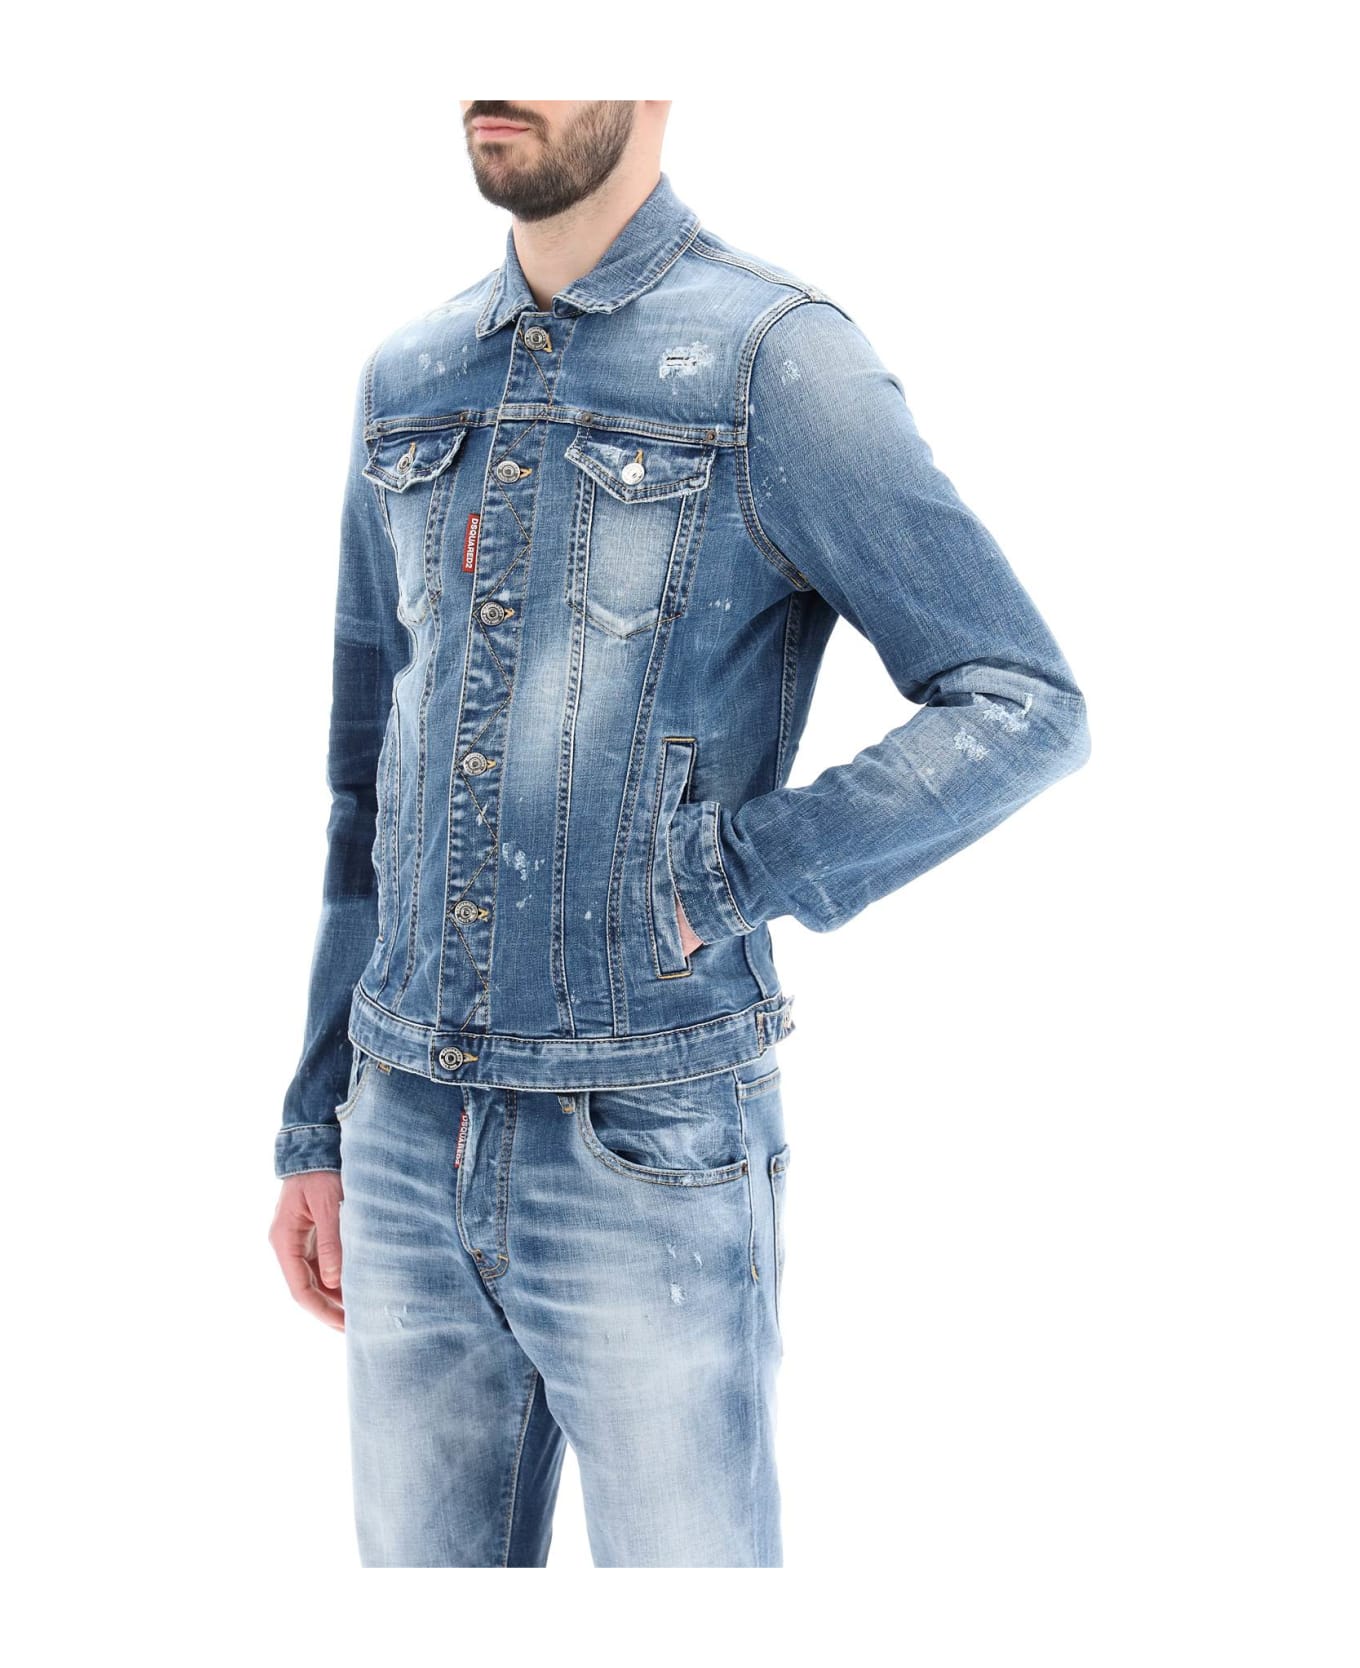 Dsquared2 Classic Jean Jacket - Navy blue